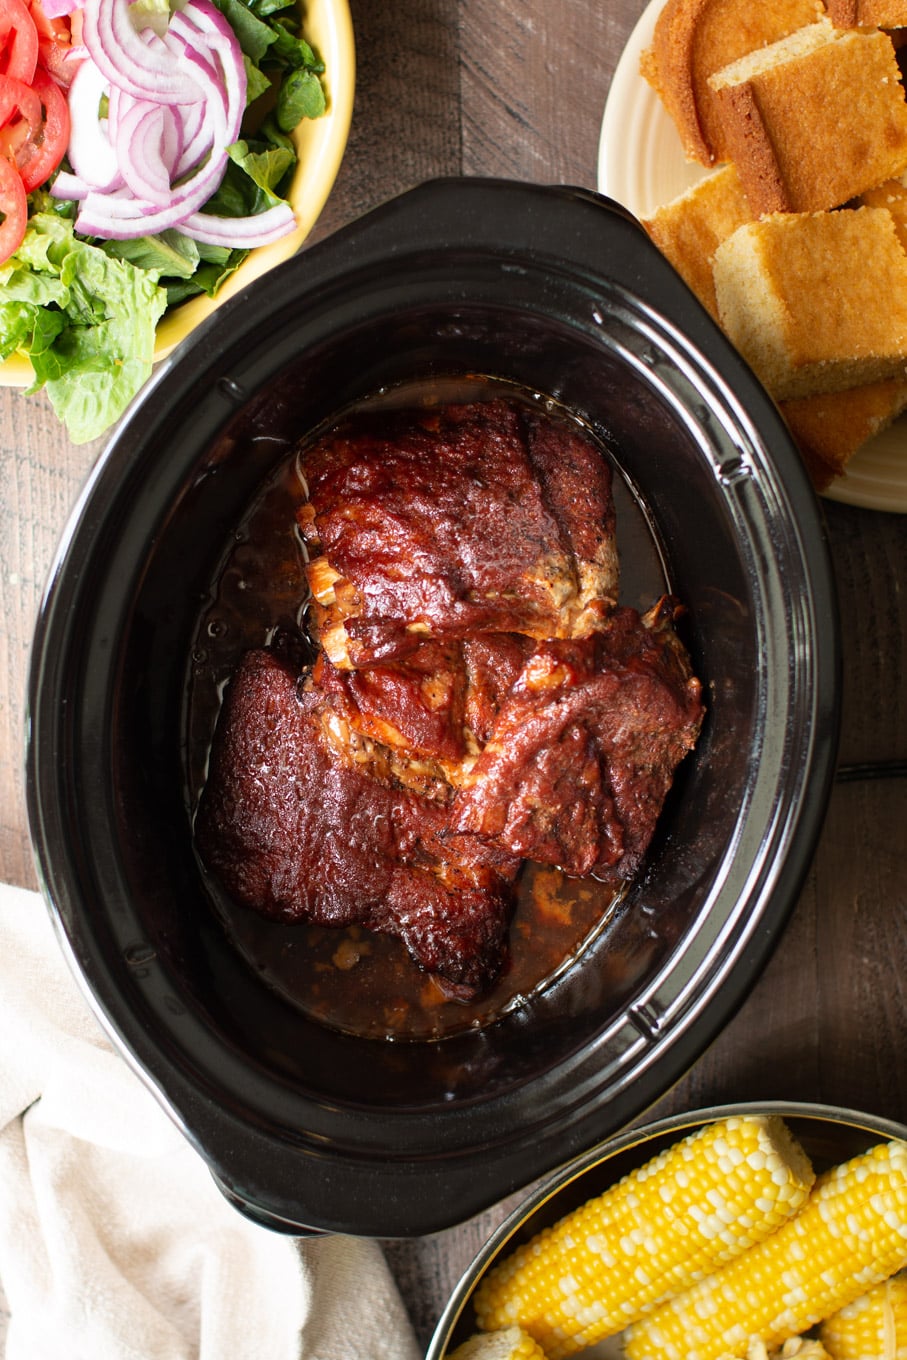 Slow Cooker Baby Back Ribs - The Magical Slow Cooker